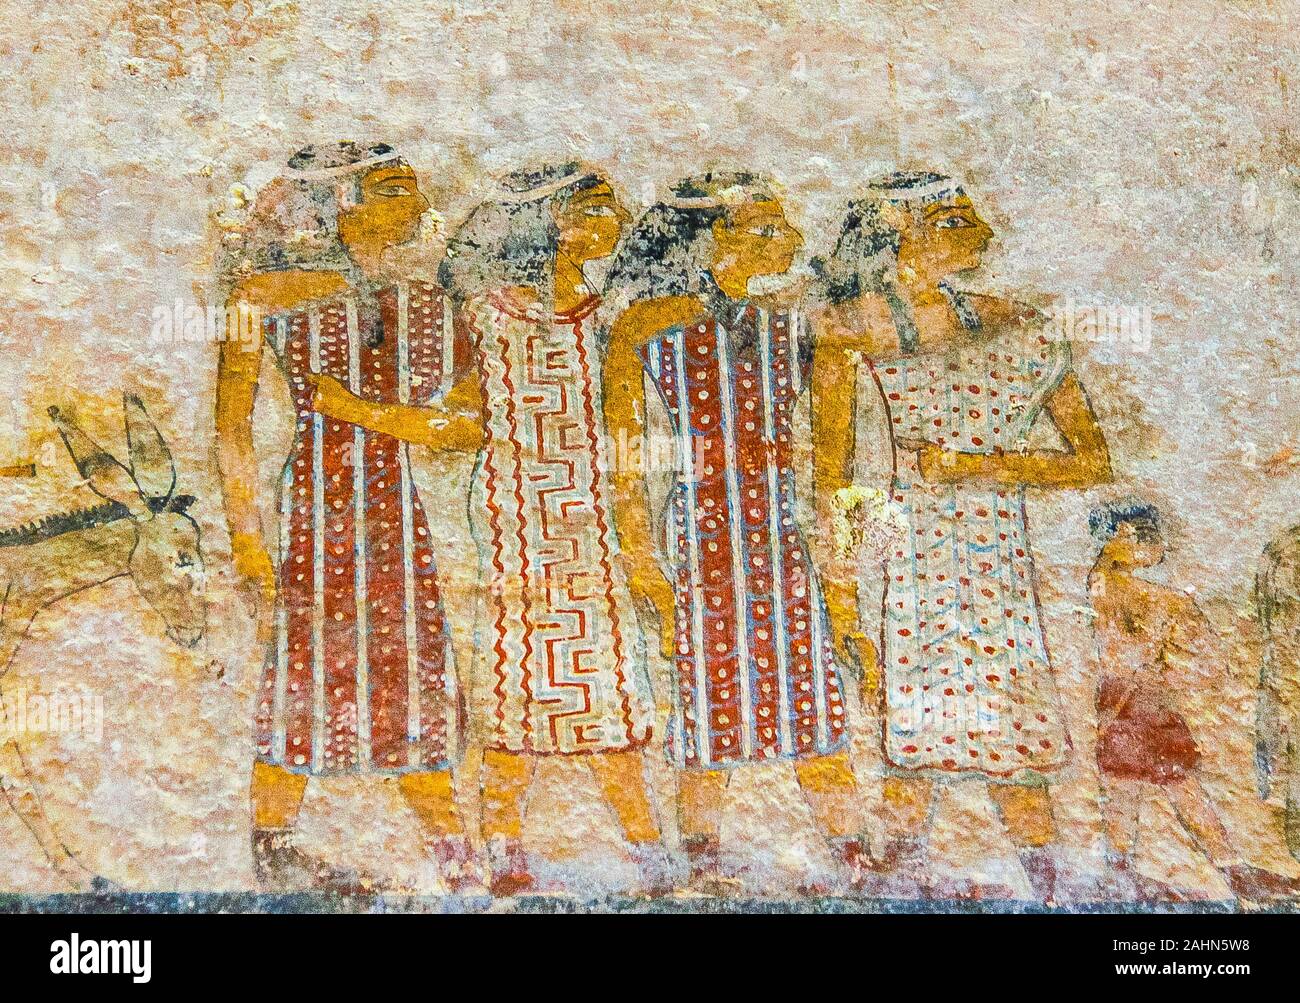 Middle Egypt, Beni Hasan, the tomb of Khnumhotep II dates from the Middle Kingdom and contains the famous scene called 'arrival of the Hyksos'. Stock Photo